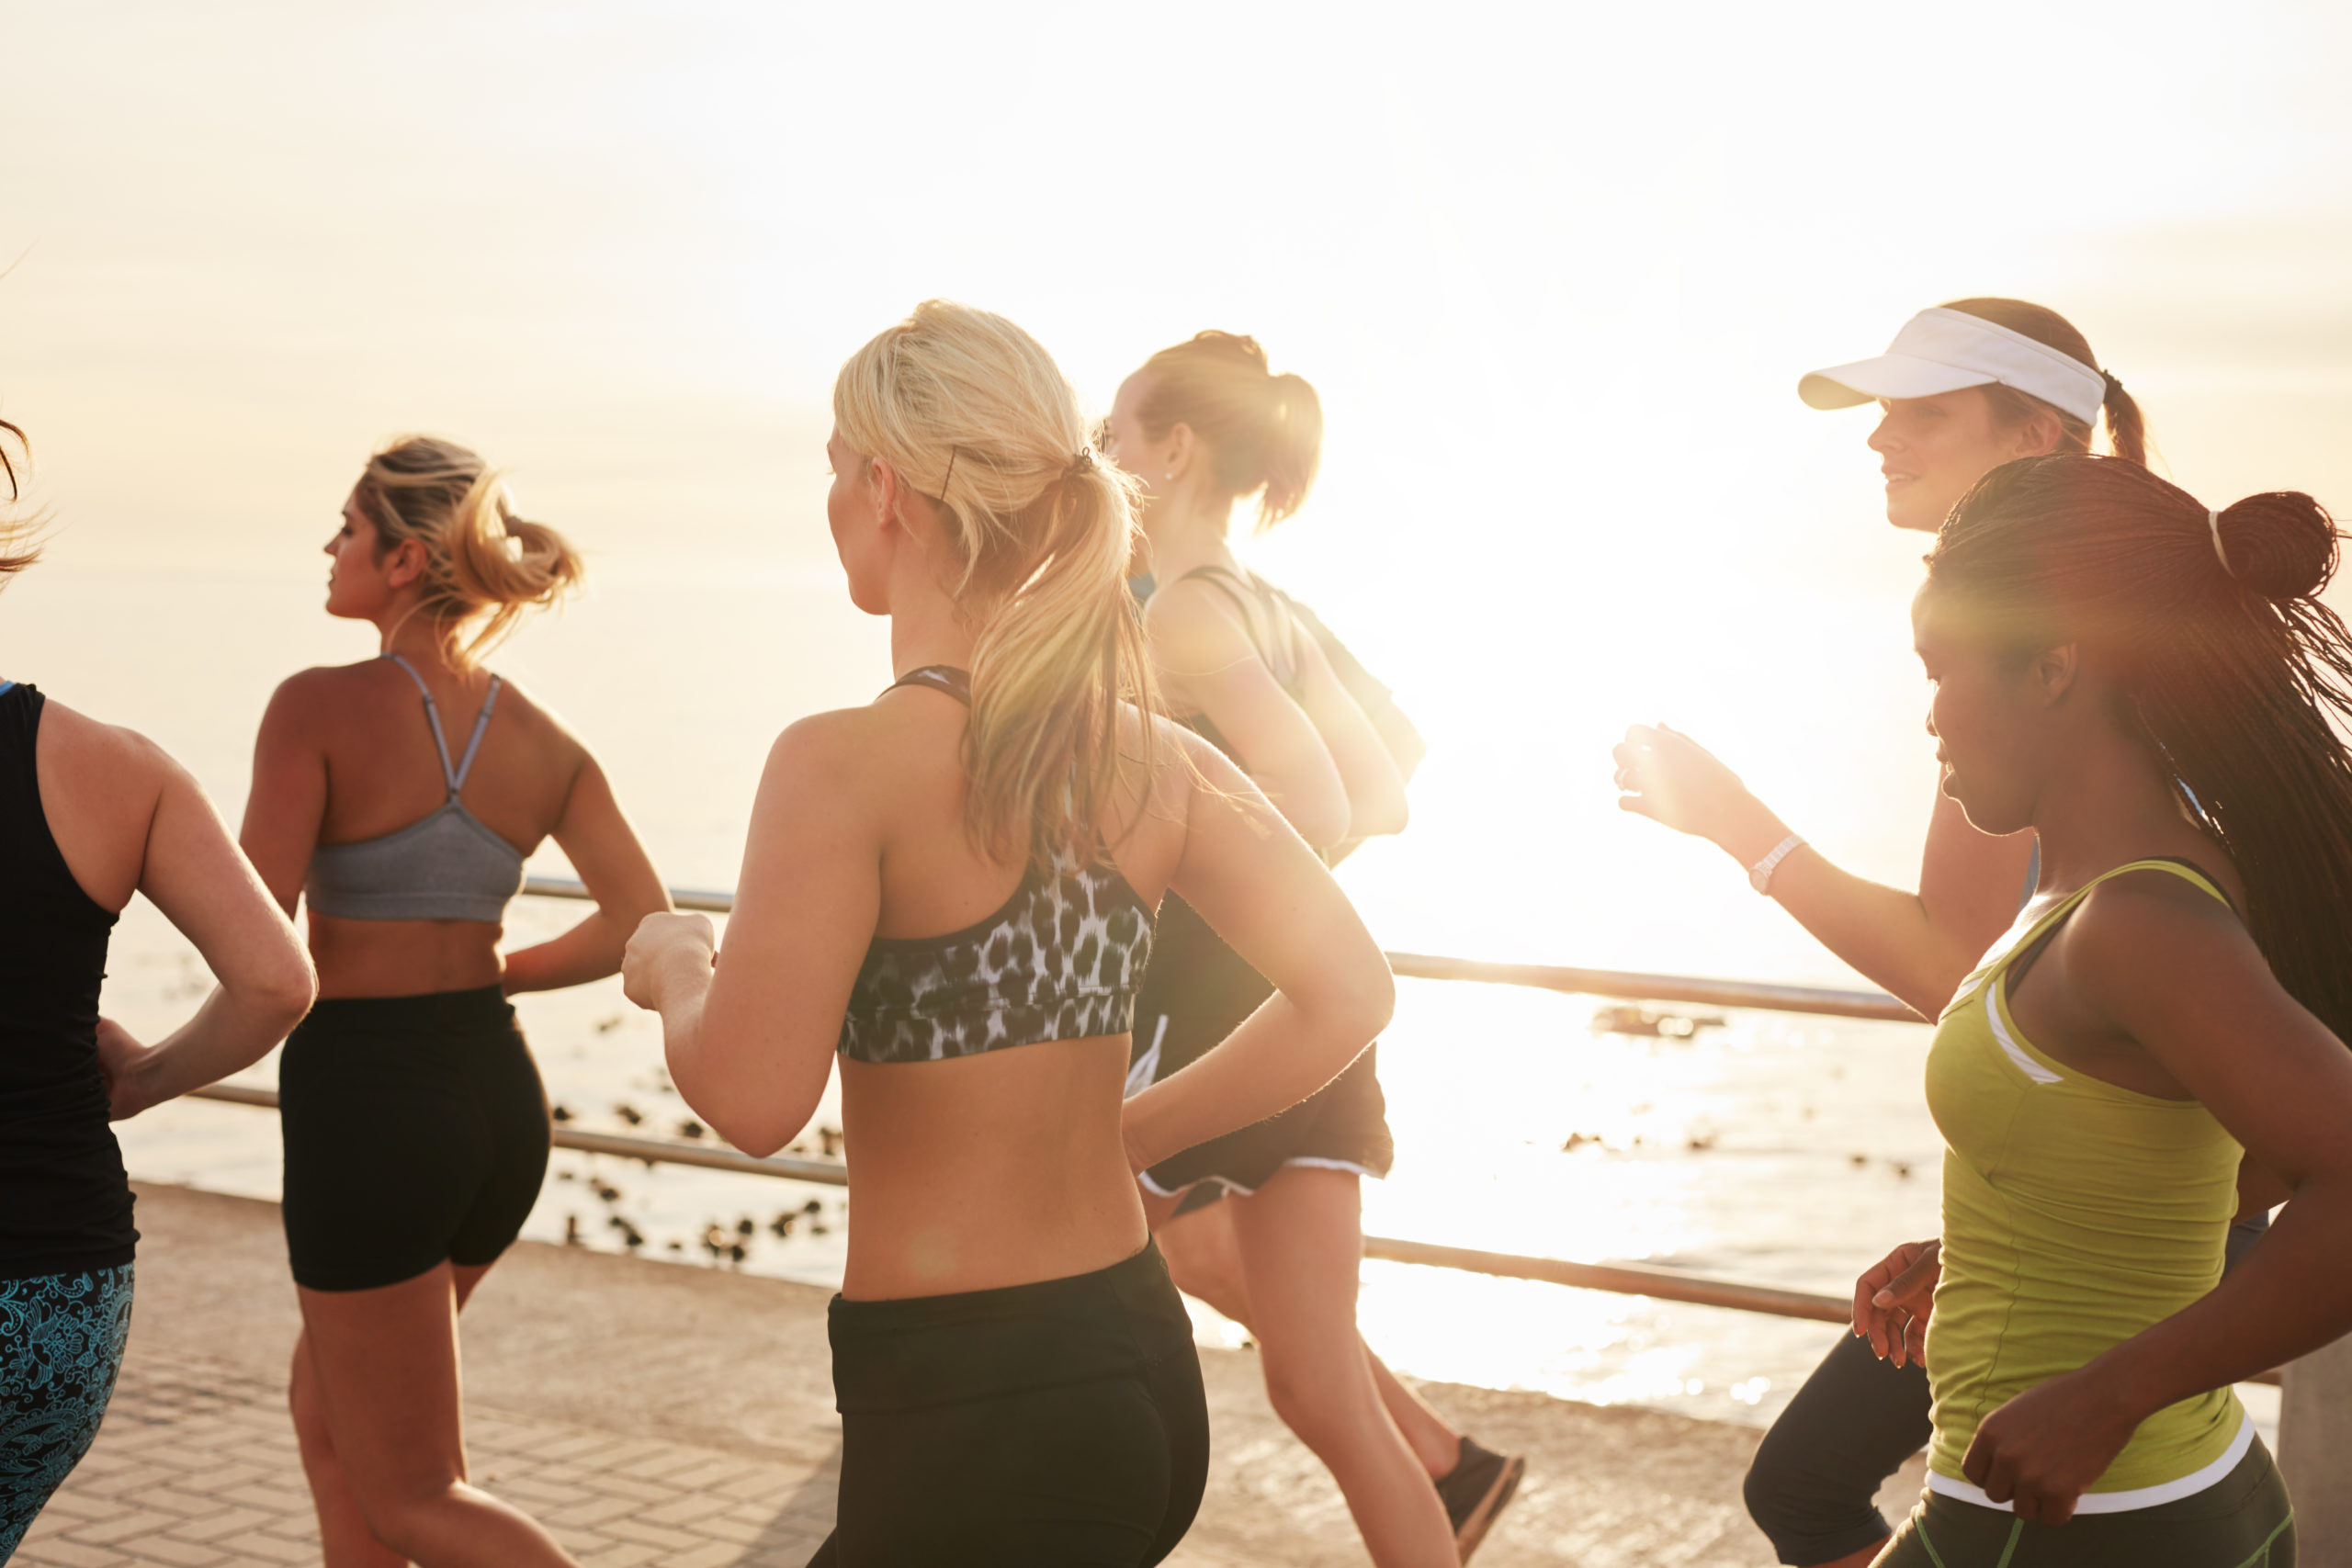 group-of-fit-young-women-running-together-2021-08-26-19-58-11-utc-scaled.jpg